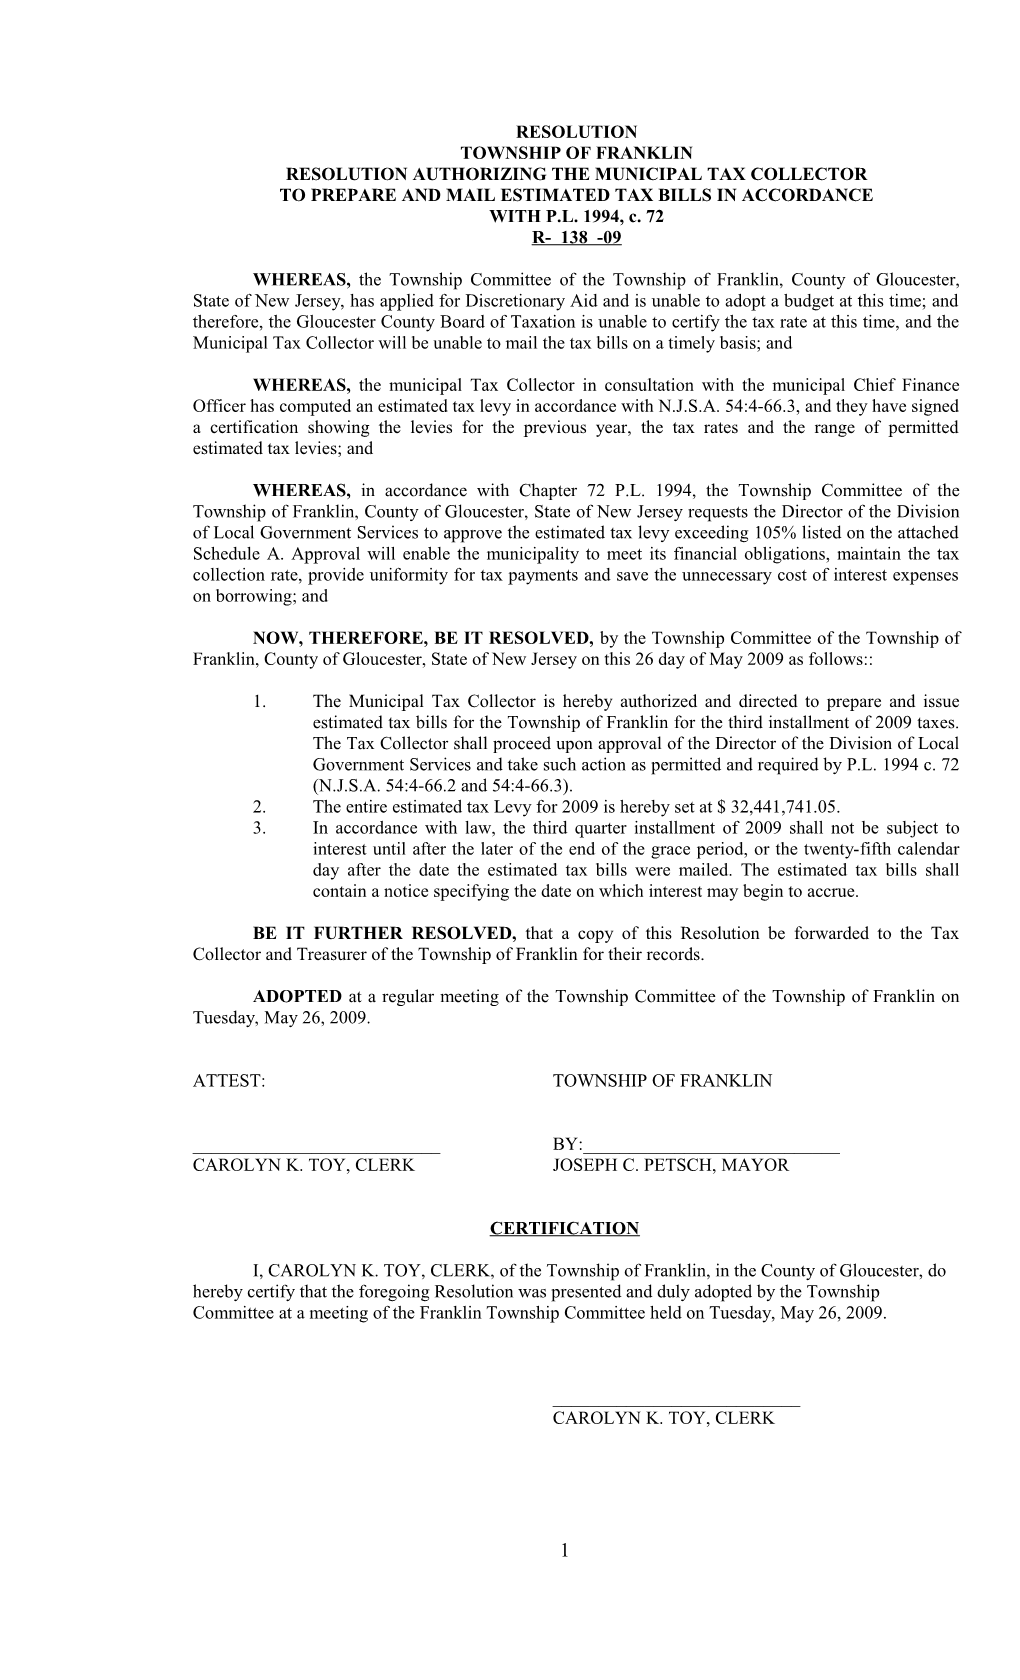 Resolution Authorizing the Municipal Tax Collector